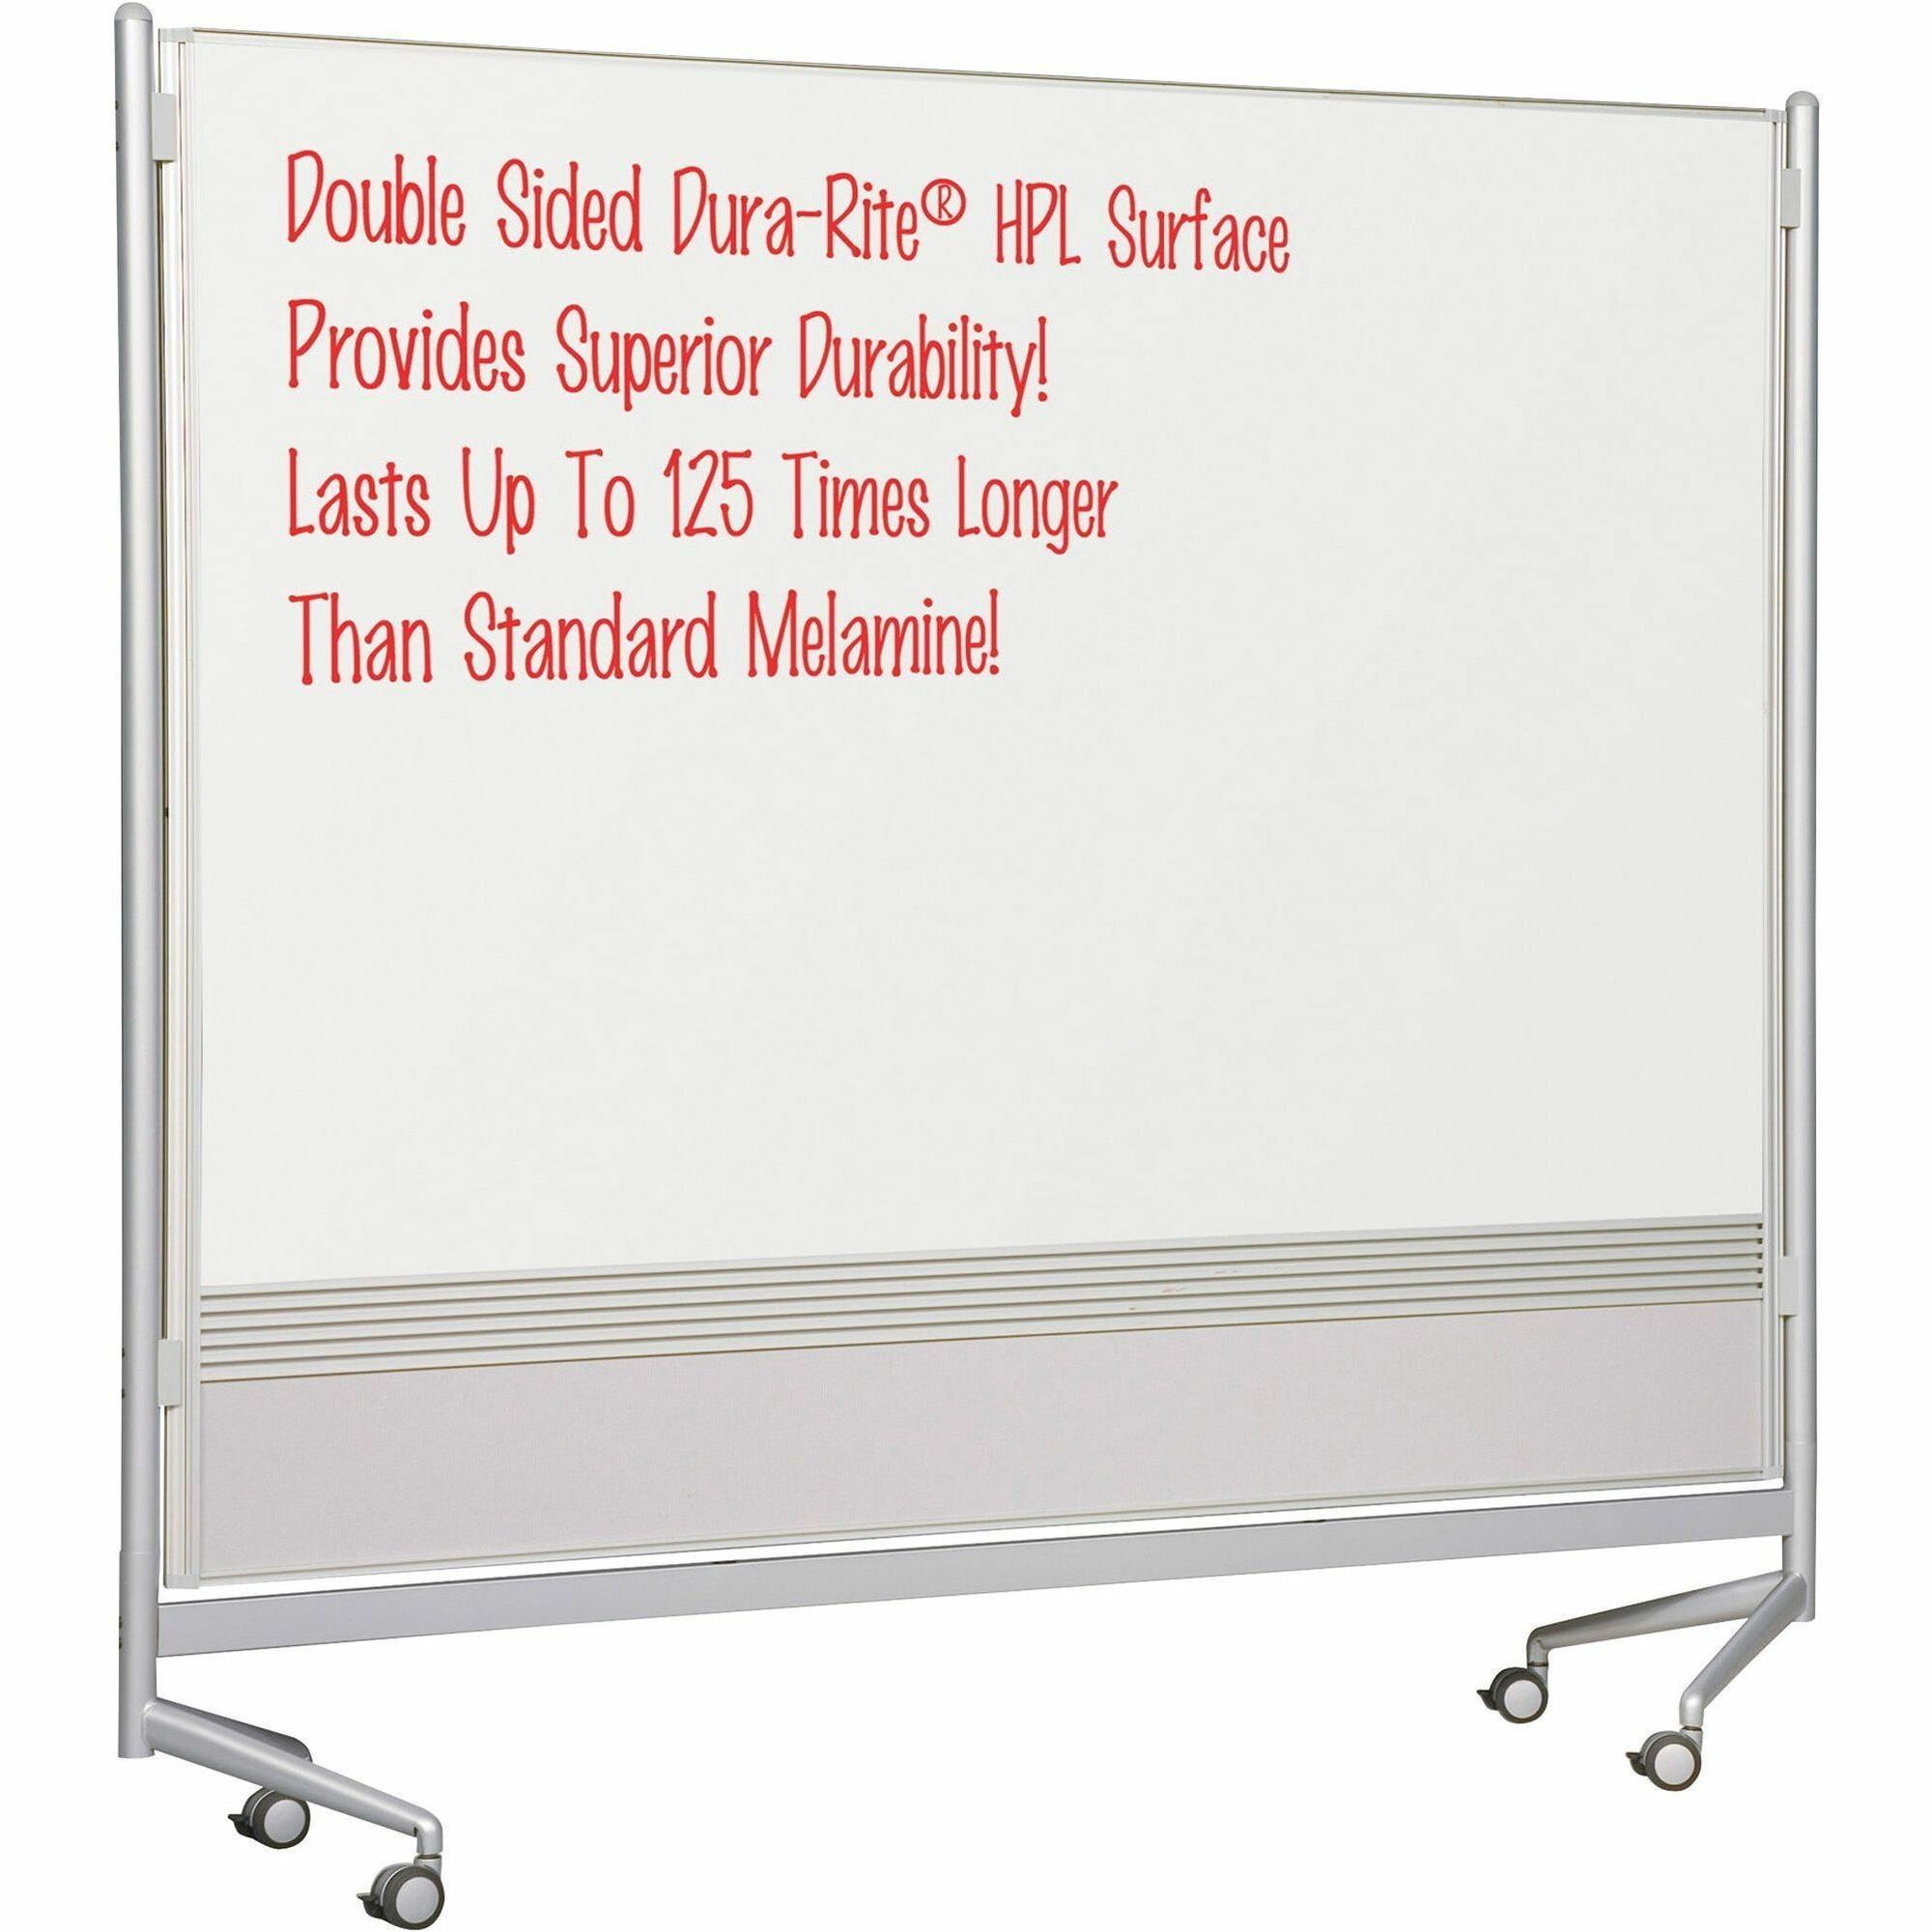 1ft x 1.5ft Double-Sided Whiteboard and Chalkboard Surface - Both Side